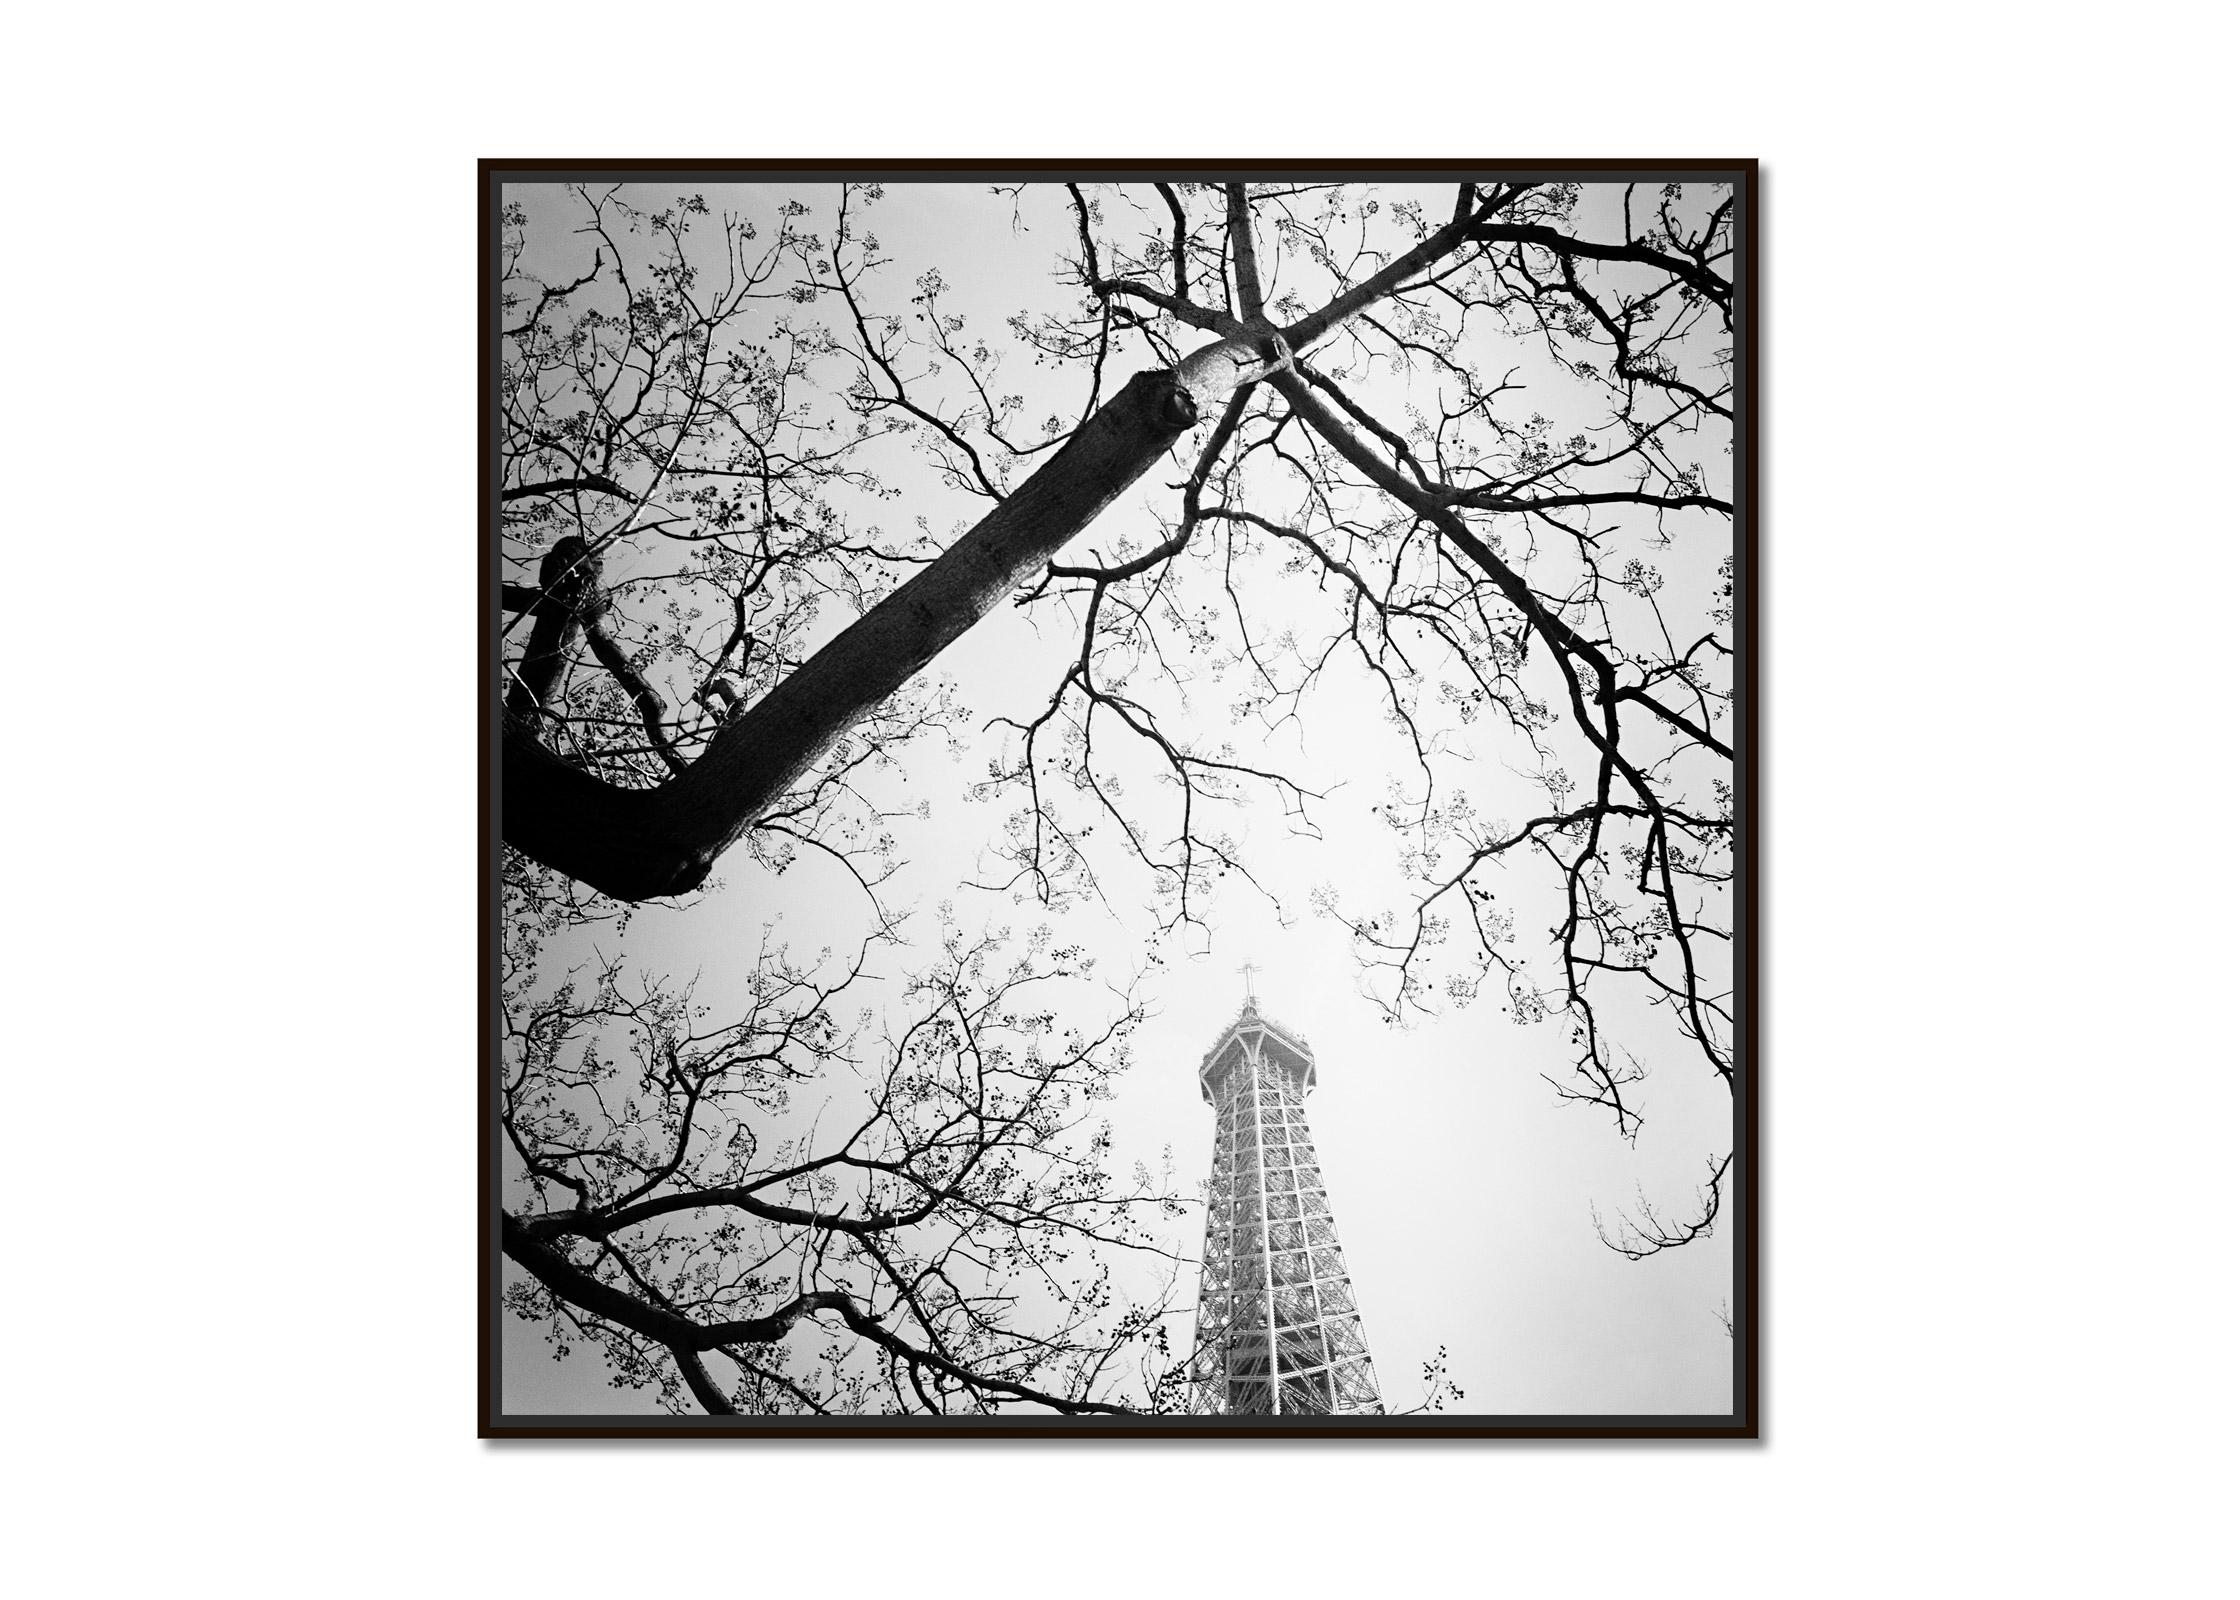 Tree and the Eiffel Tower, Paris, France, black white art landscape photography - Photograph by Gerald Berghammer